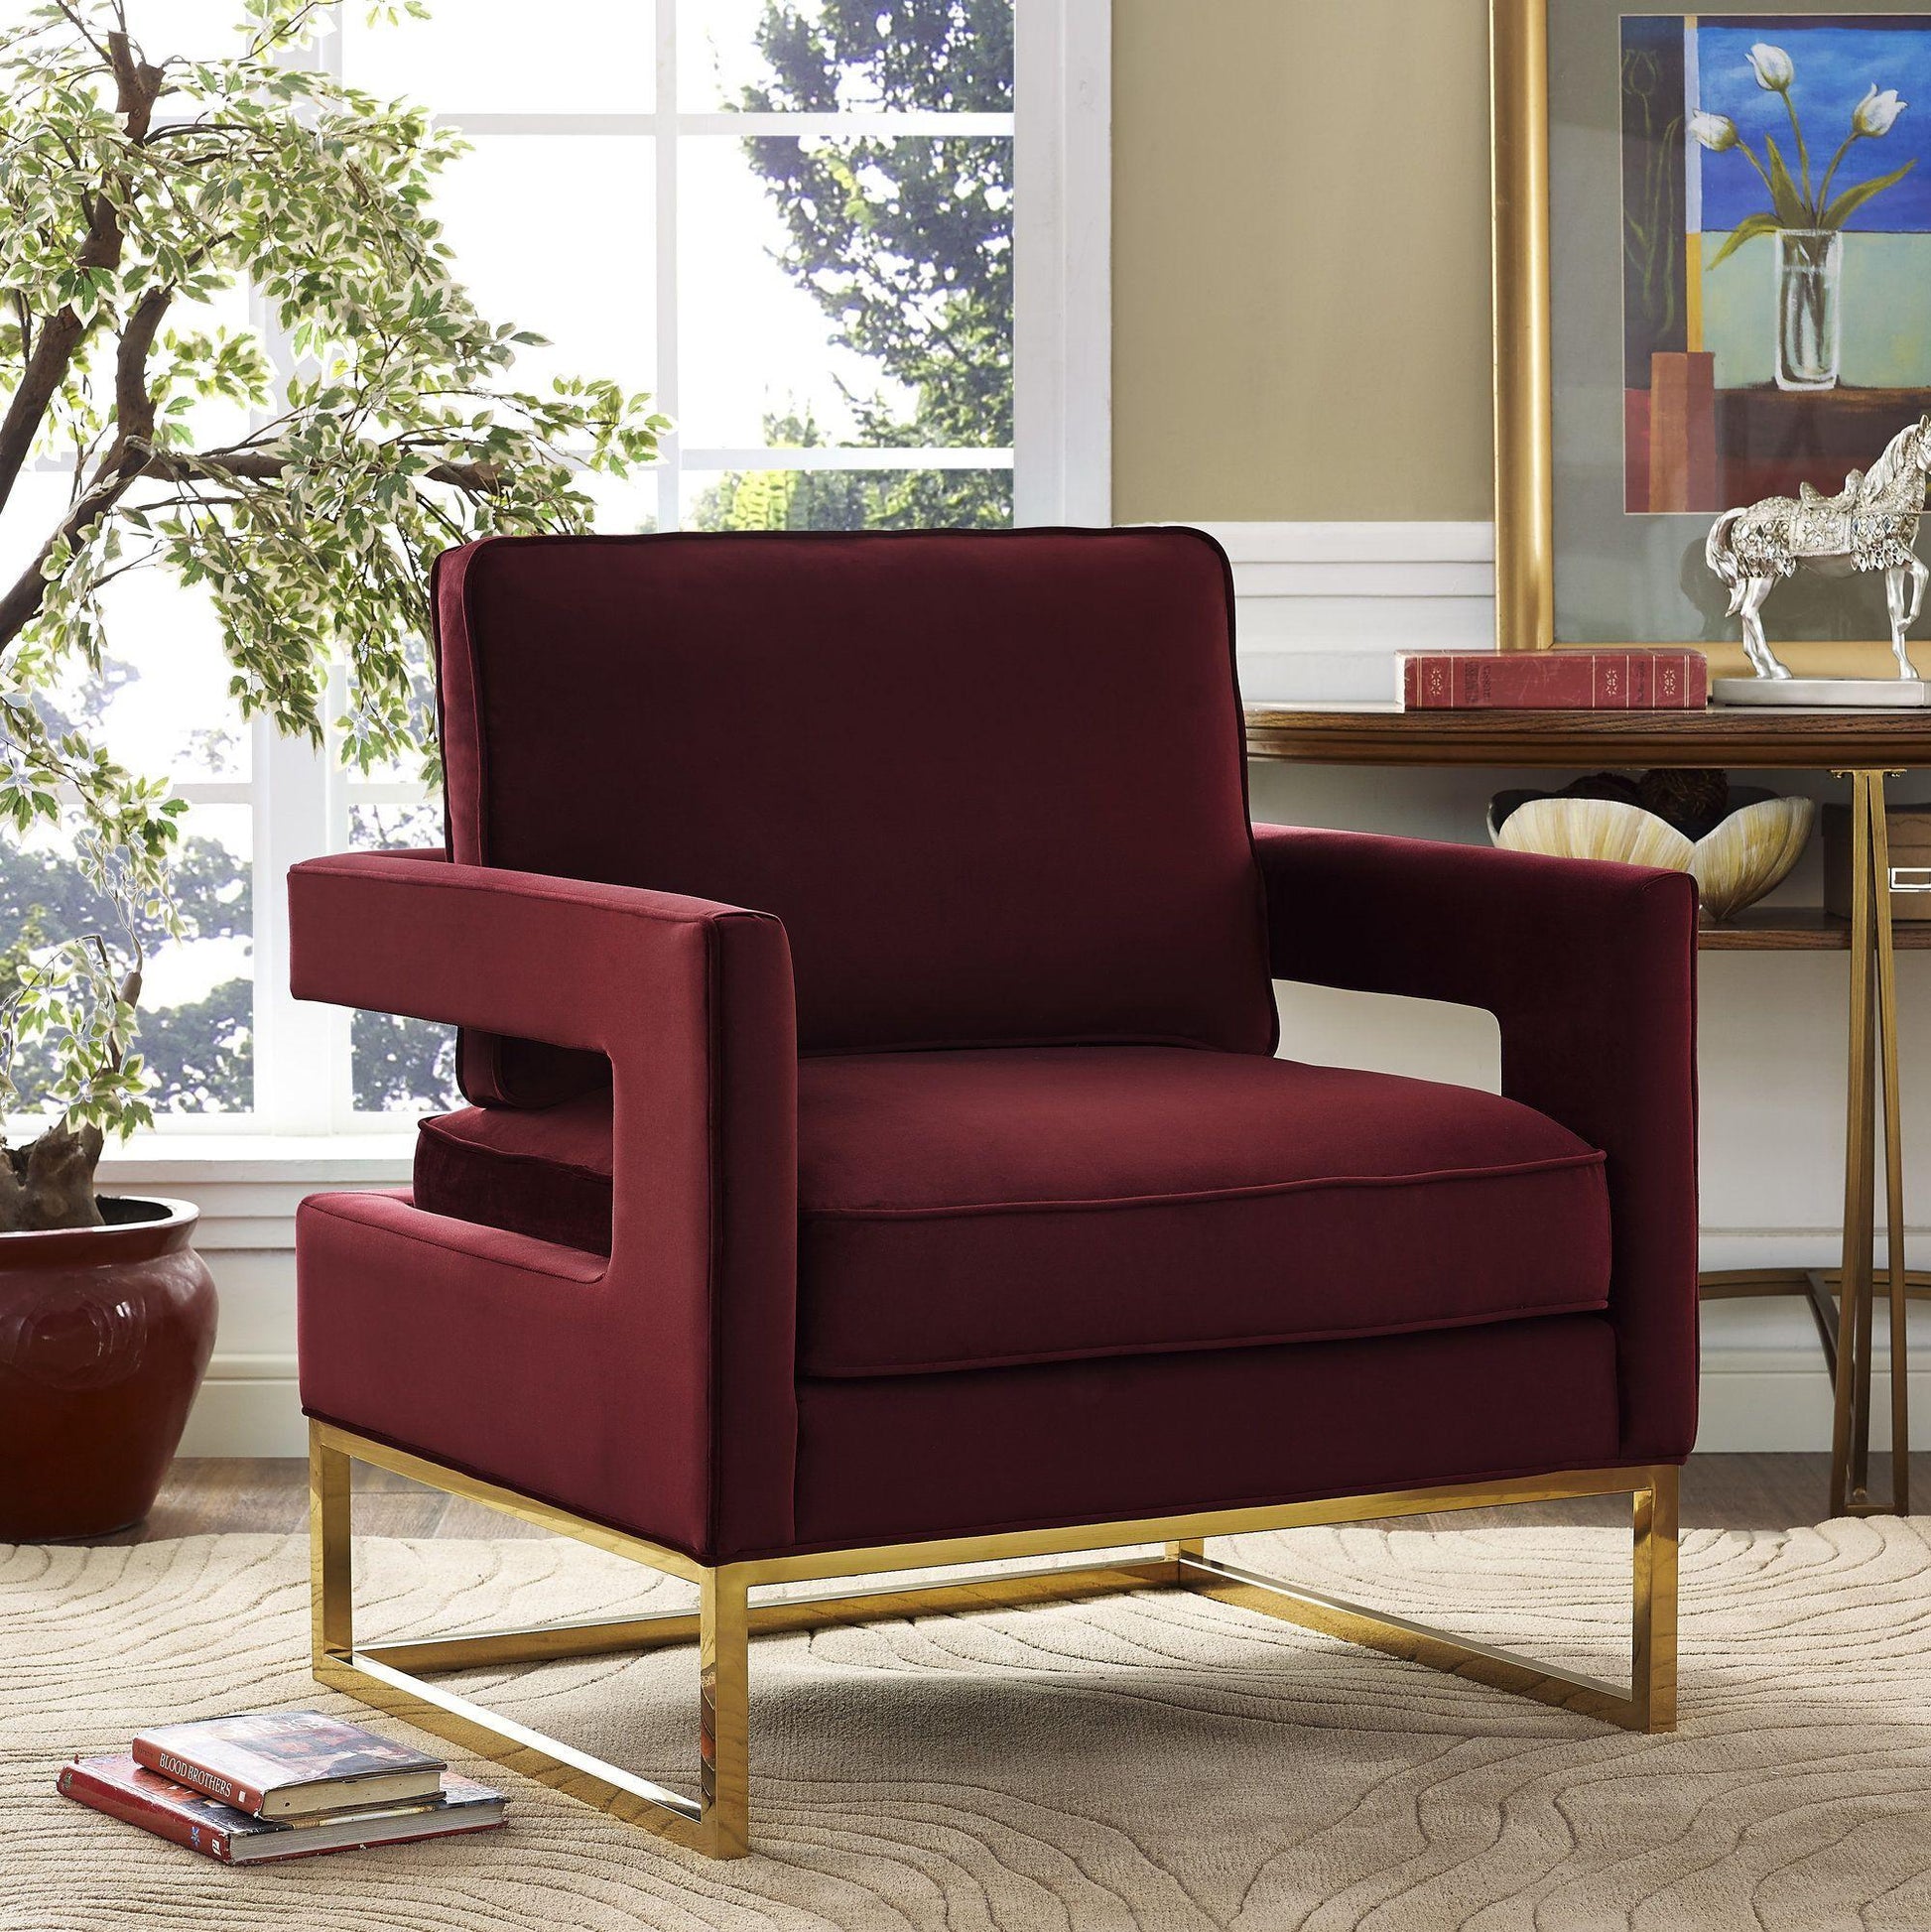 Tov Furniture Avery Maroon Velvet Chair With Polished Gold Base